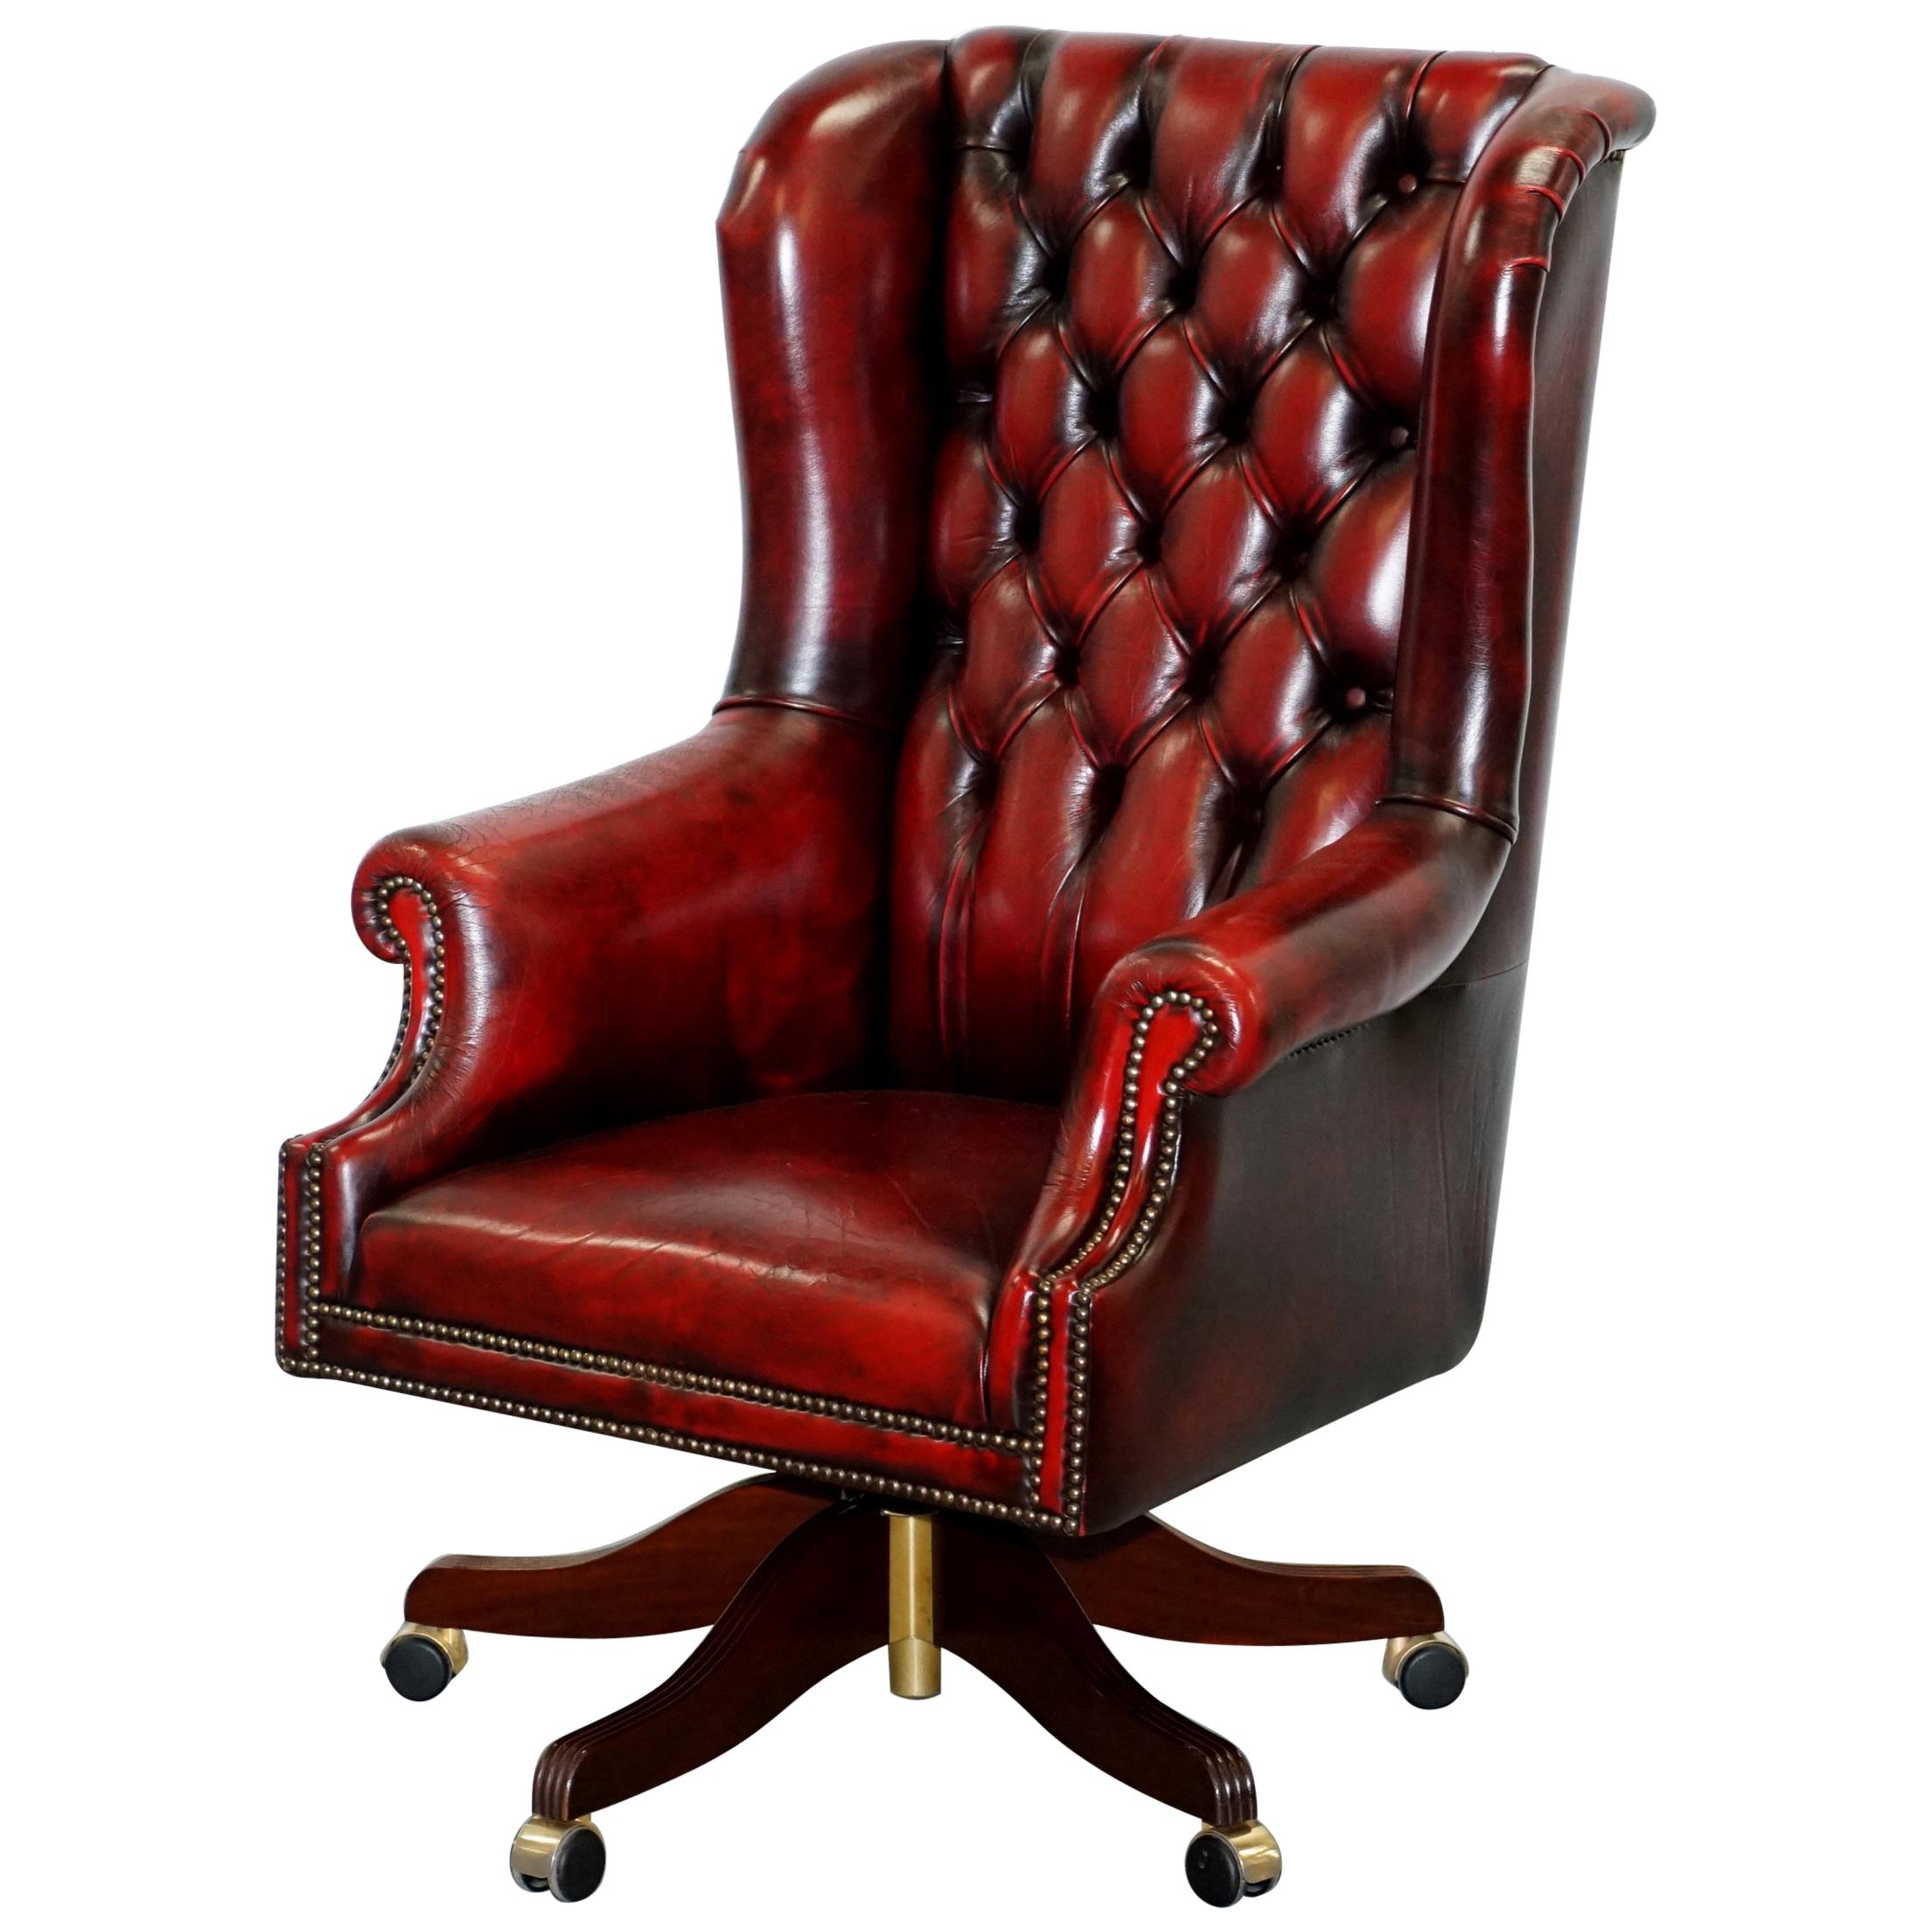 Bevan Funnell Presidents Oxblood Leather Swivel Wingback Office Chair